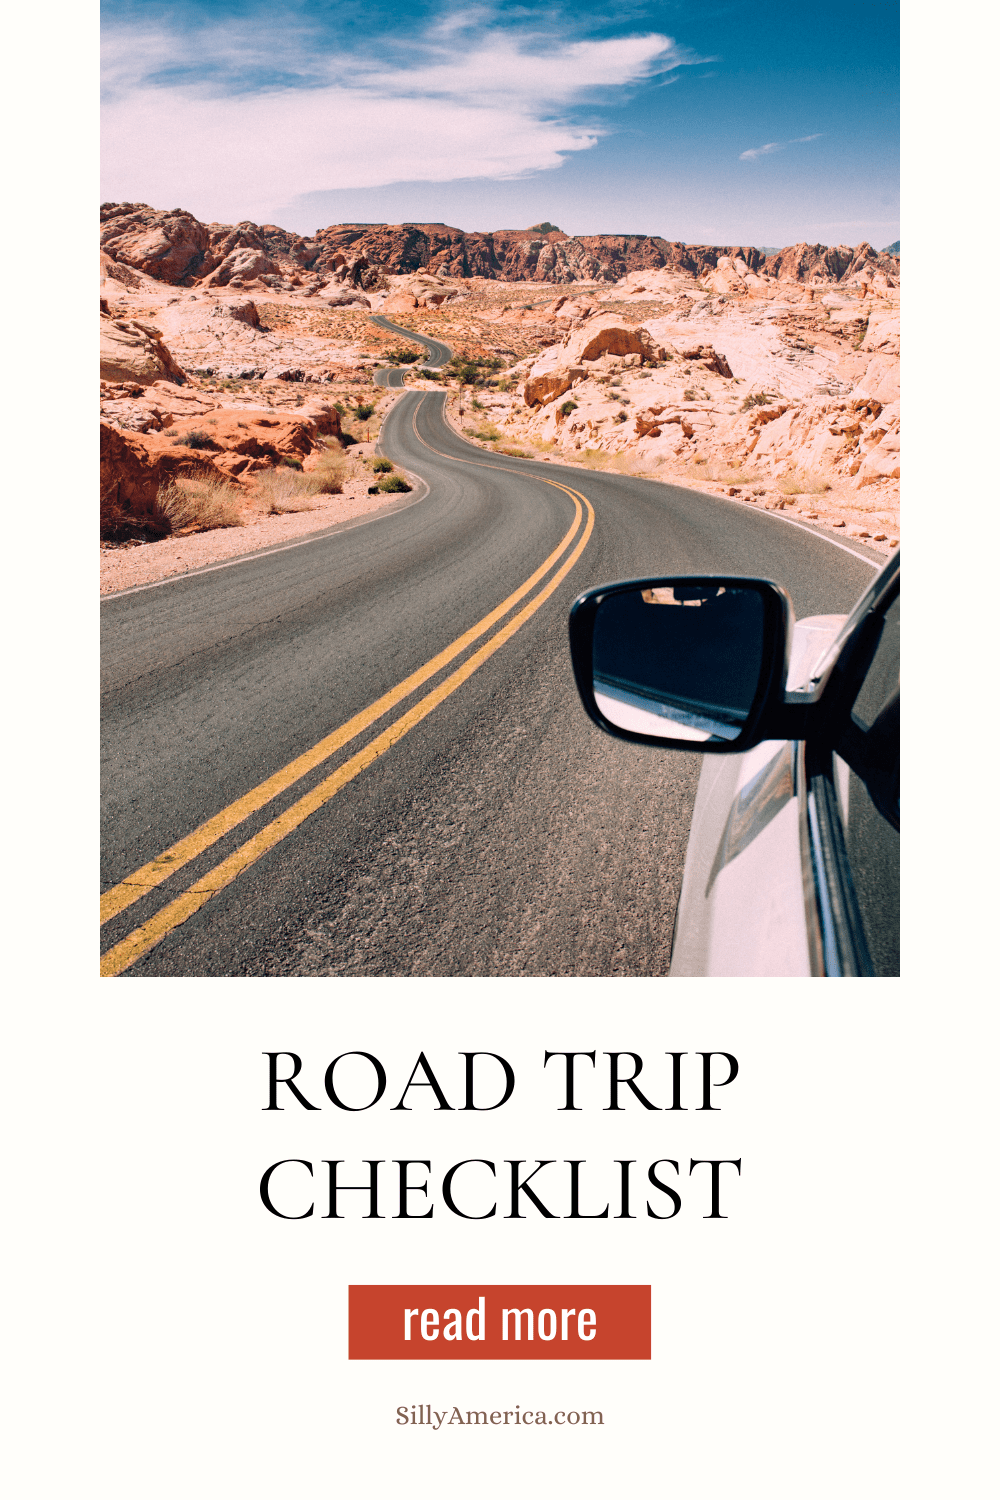 Overwhelmed with planning a road trip and all the things that go into pre-vacation planning? Use this road trip checklist to organize your planning and get a step-by-step guide to all the things you should be thinking about and doing to prepare to hit the road for a long car ride. Plus download the free printable PDF to always have this to do list on hand. #RoadTrip #RoadTripPlanning #RoadTripChecklist #RoadTripToDoList #Checklist #ToDoList